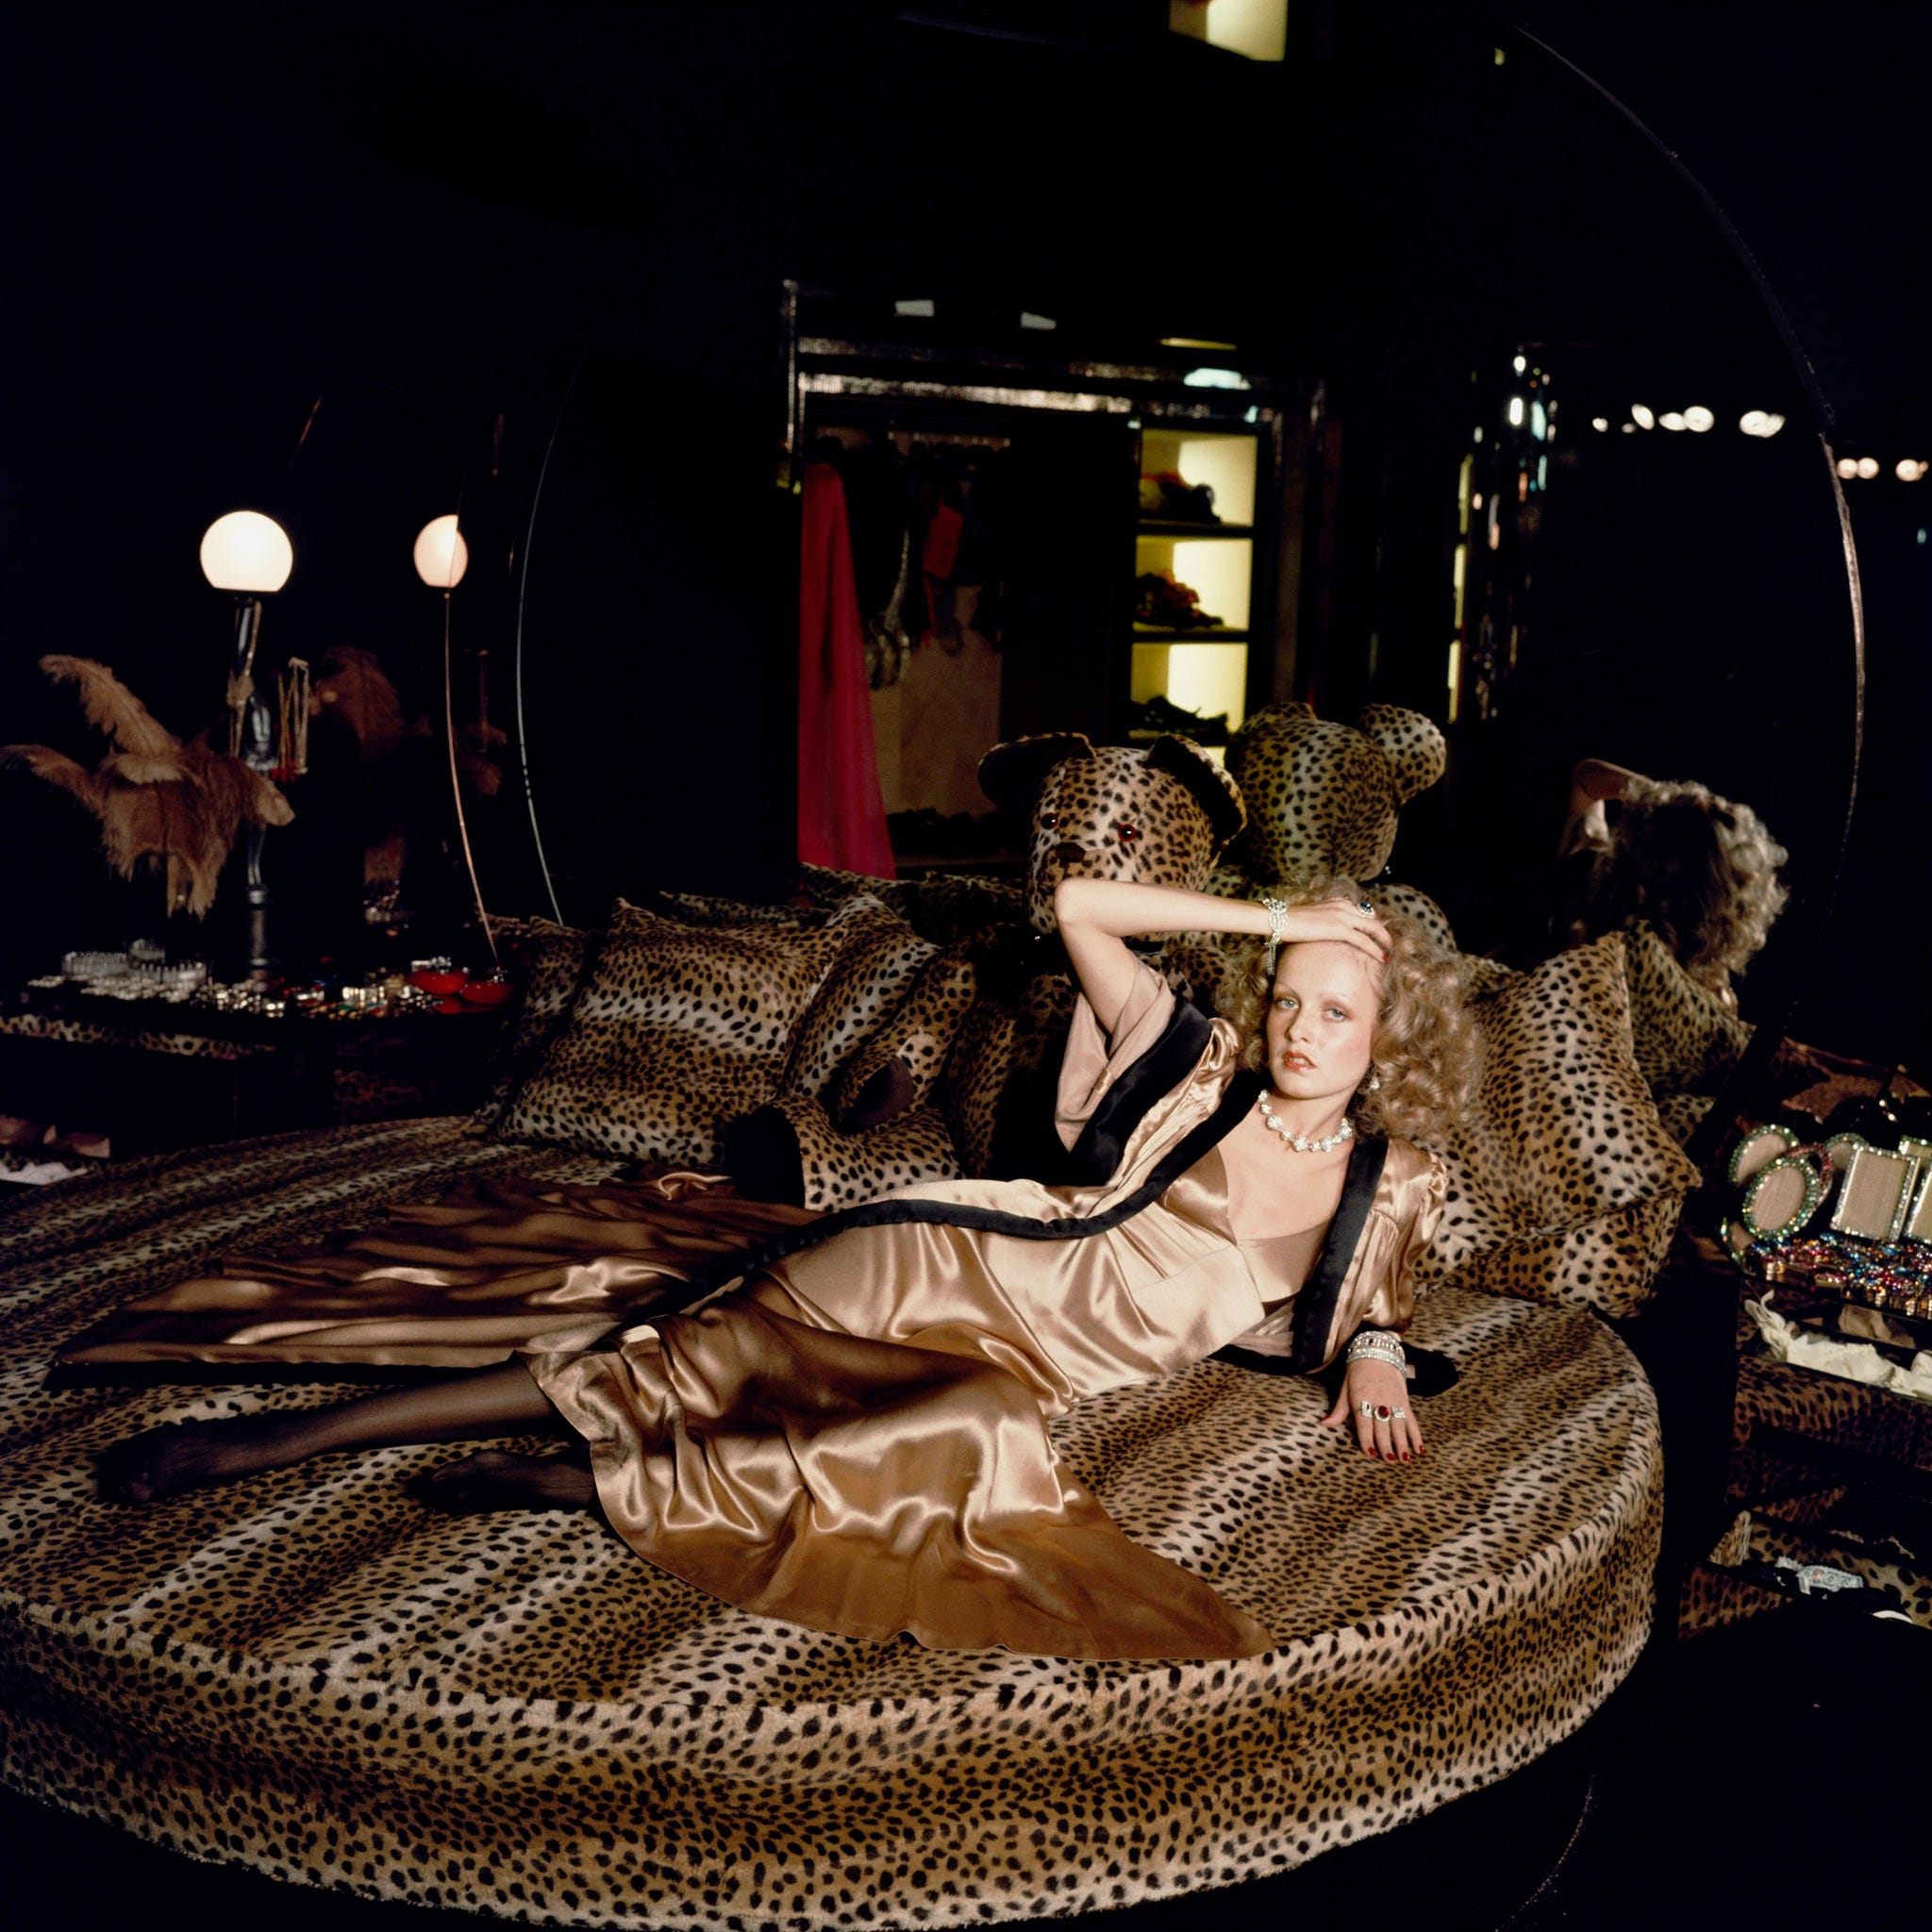 english model twiggy stretches out on a leopardskin bed at biba's kensington store, 1971